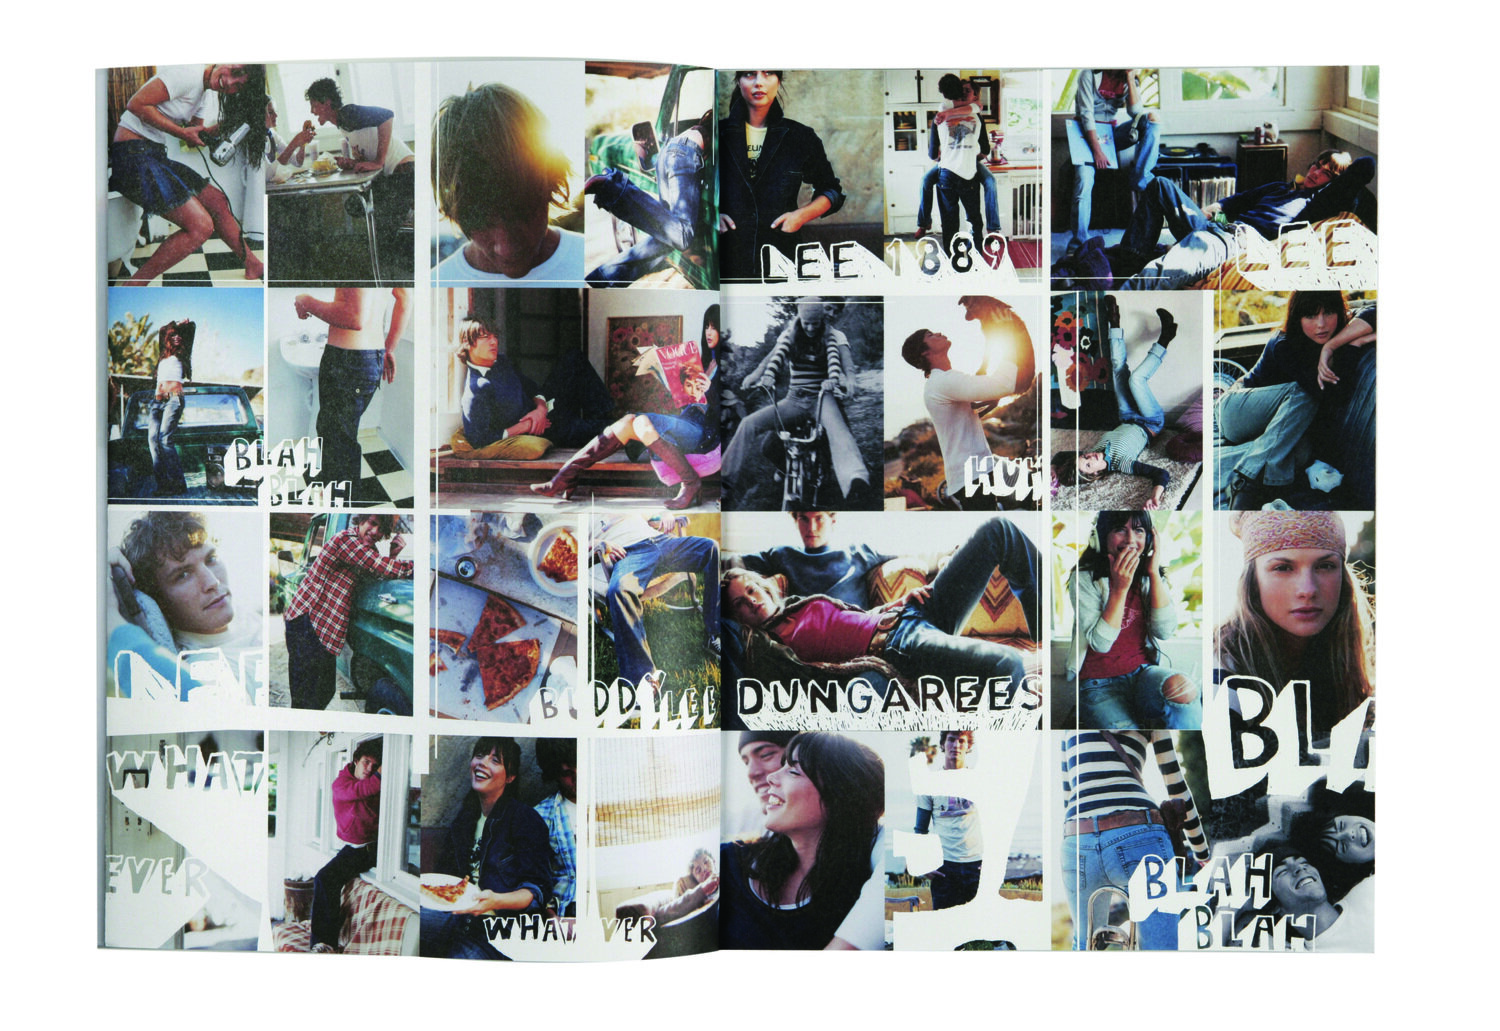 lee+dung+collage+page.jpg